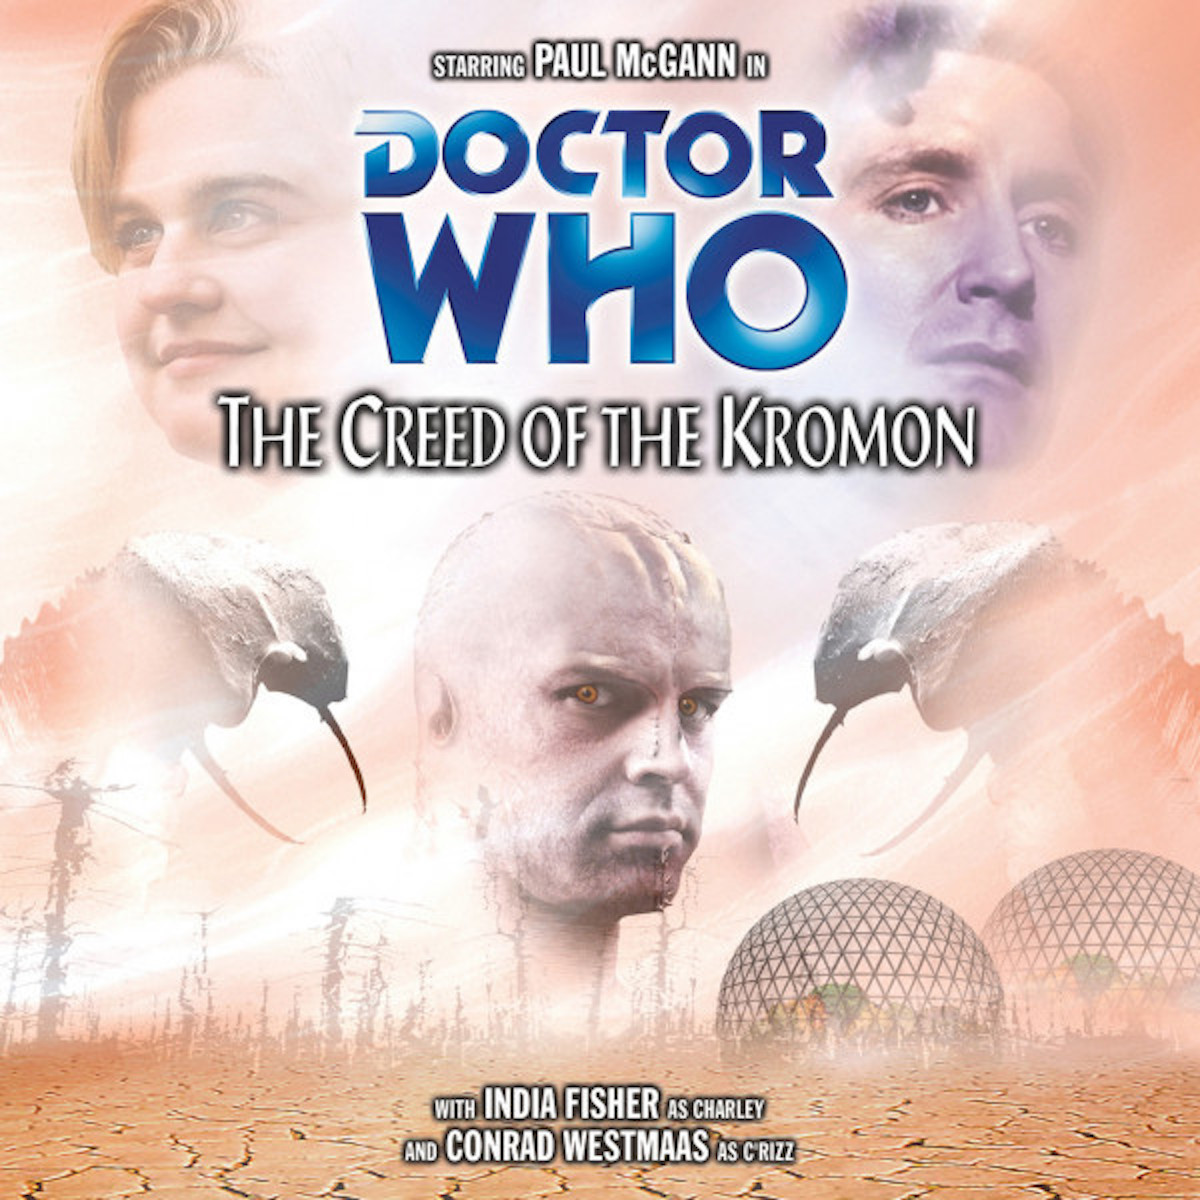 The Creed of the Kroman 